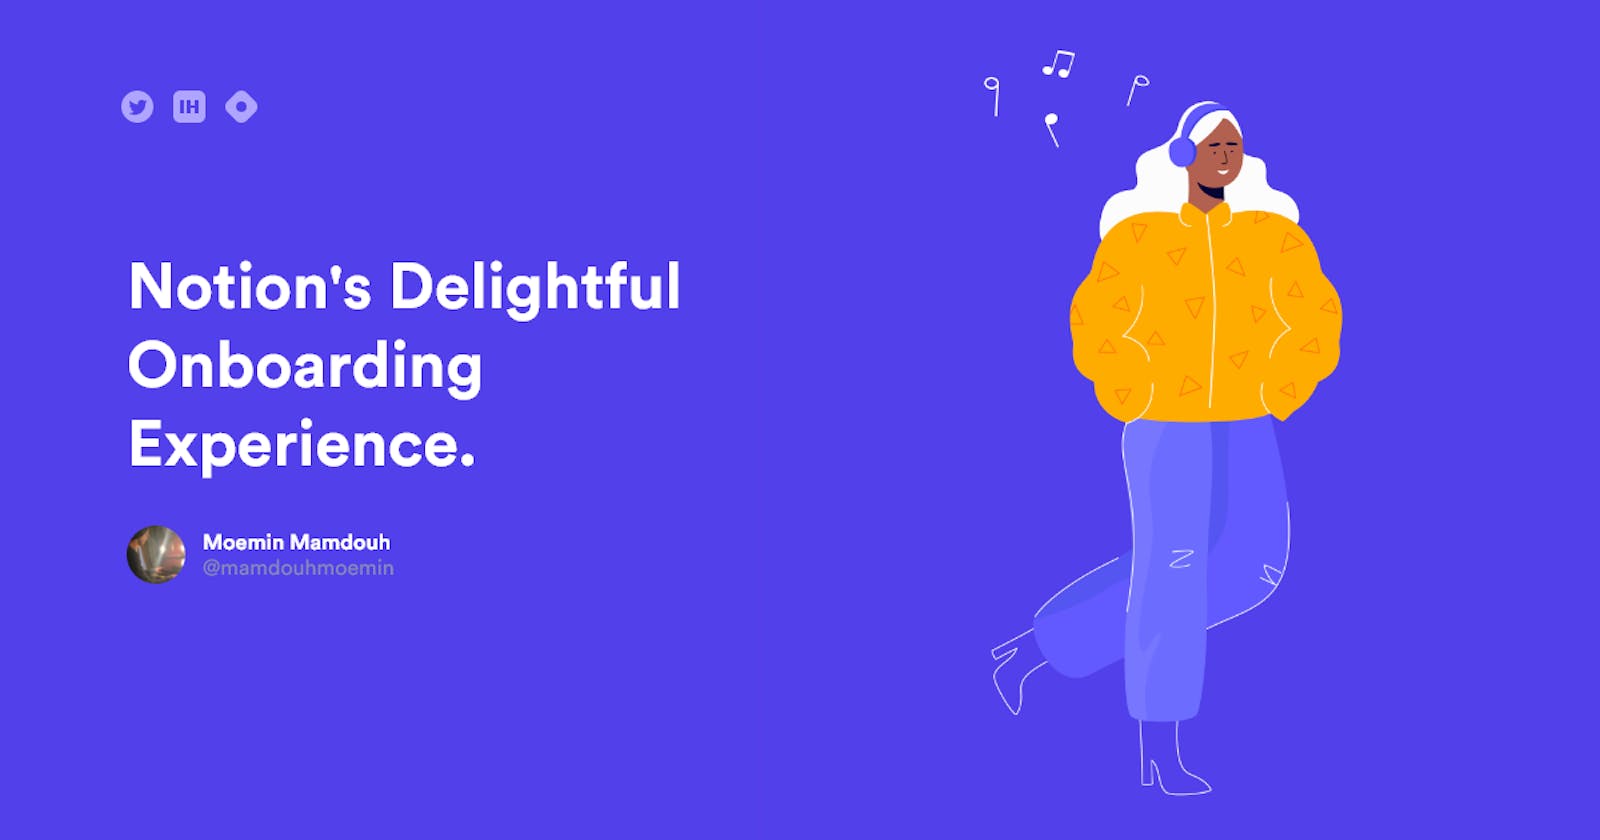 Notion's Onboarding Experience: A Case of Simplicity and Delightfulness